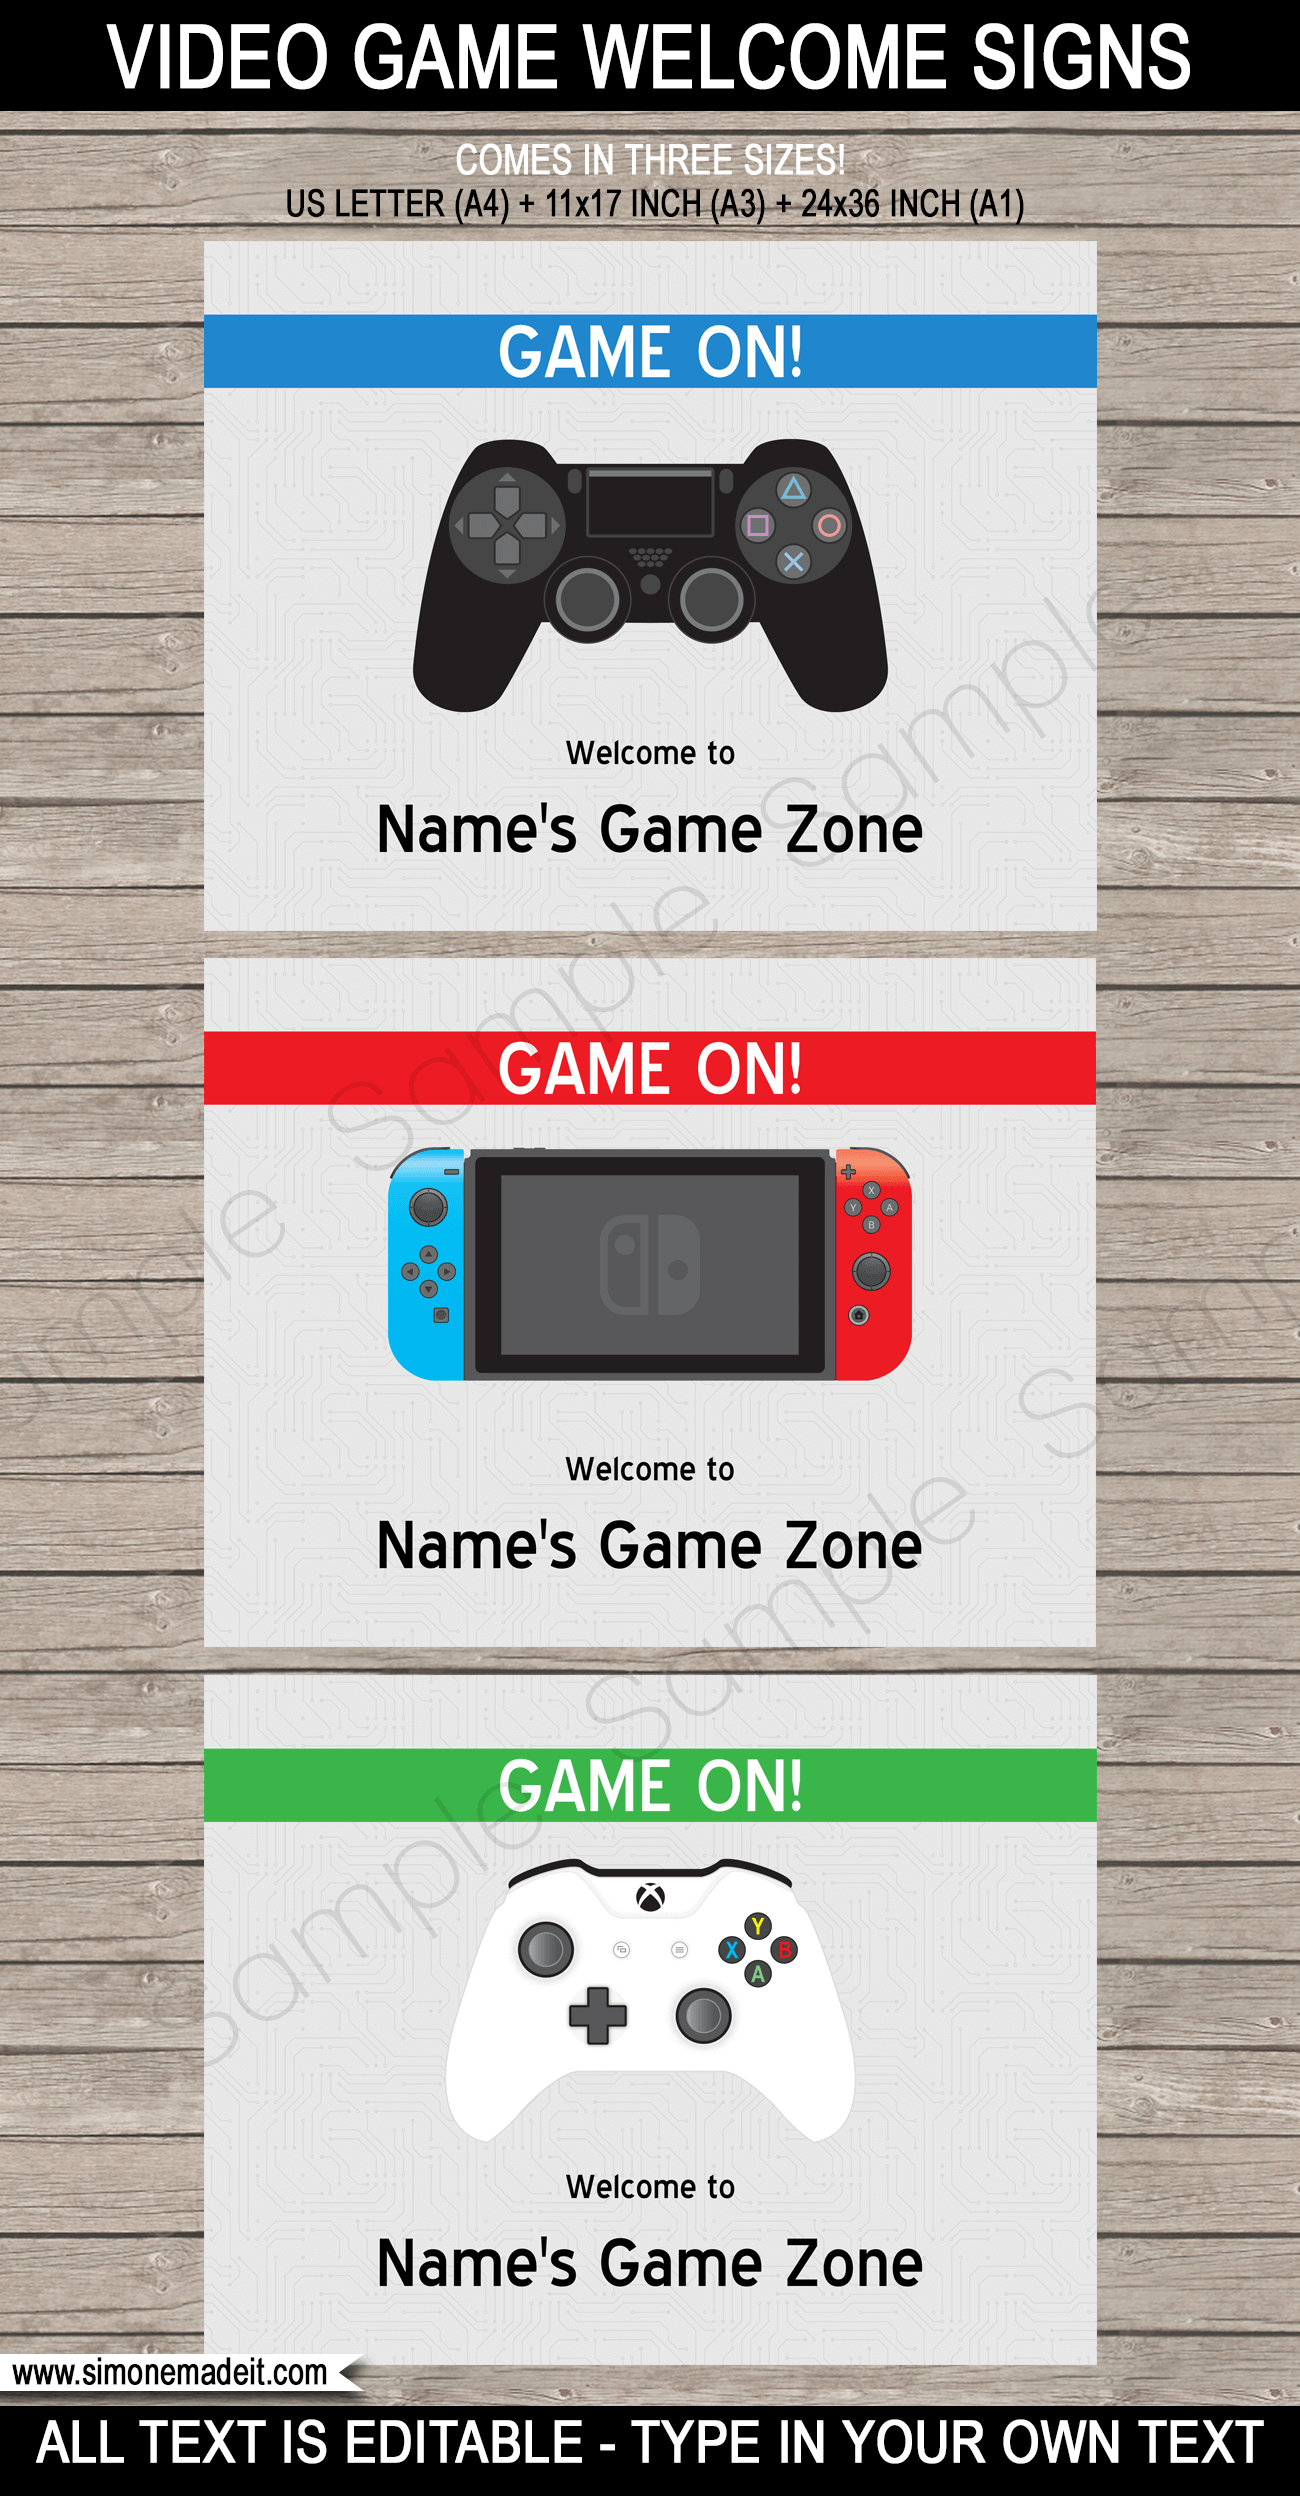 Video Game Birthday Party Theme Welcome Sign - Playstation Party Invitation, Nintendo Switch Party Invitation & Xbox Party Invitation - Editable & Printable DIY Templates - Instant download via simonemadeit.com